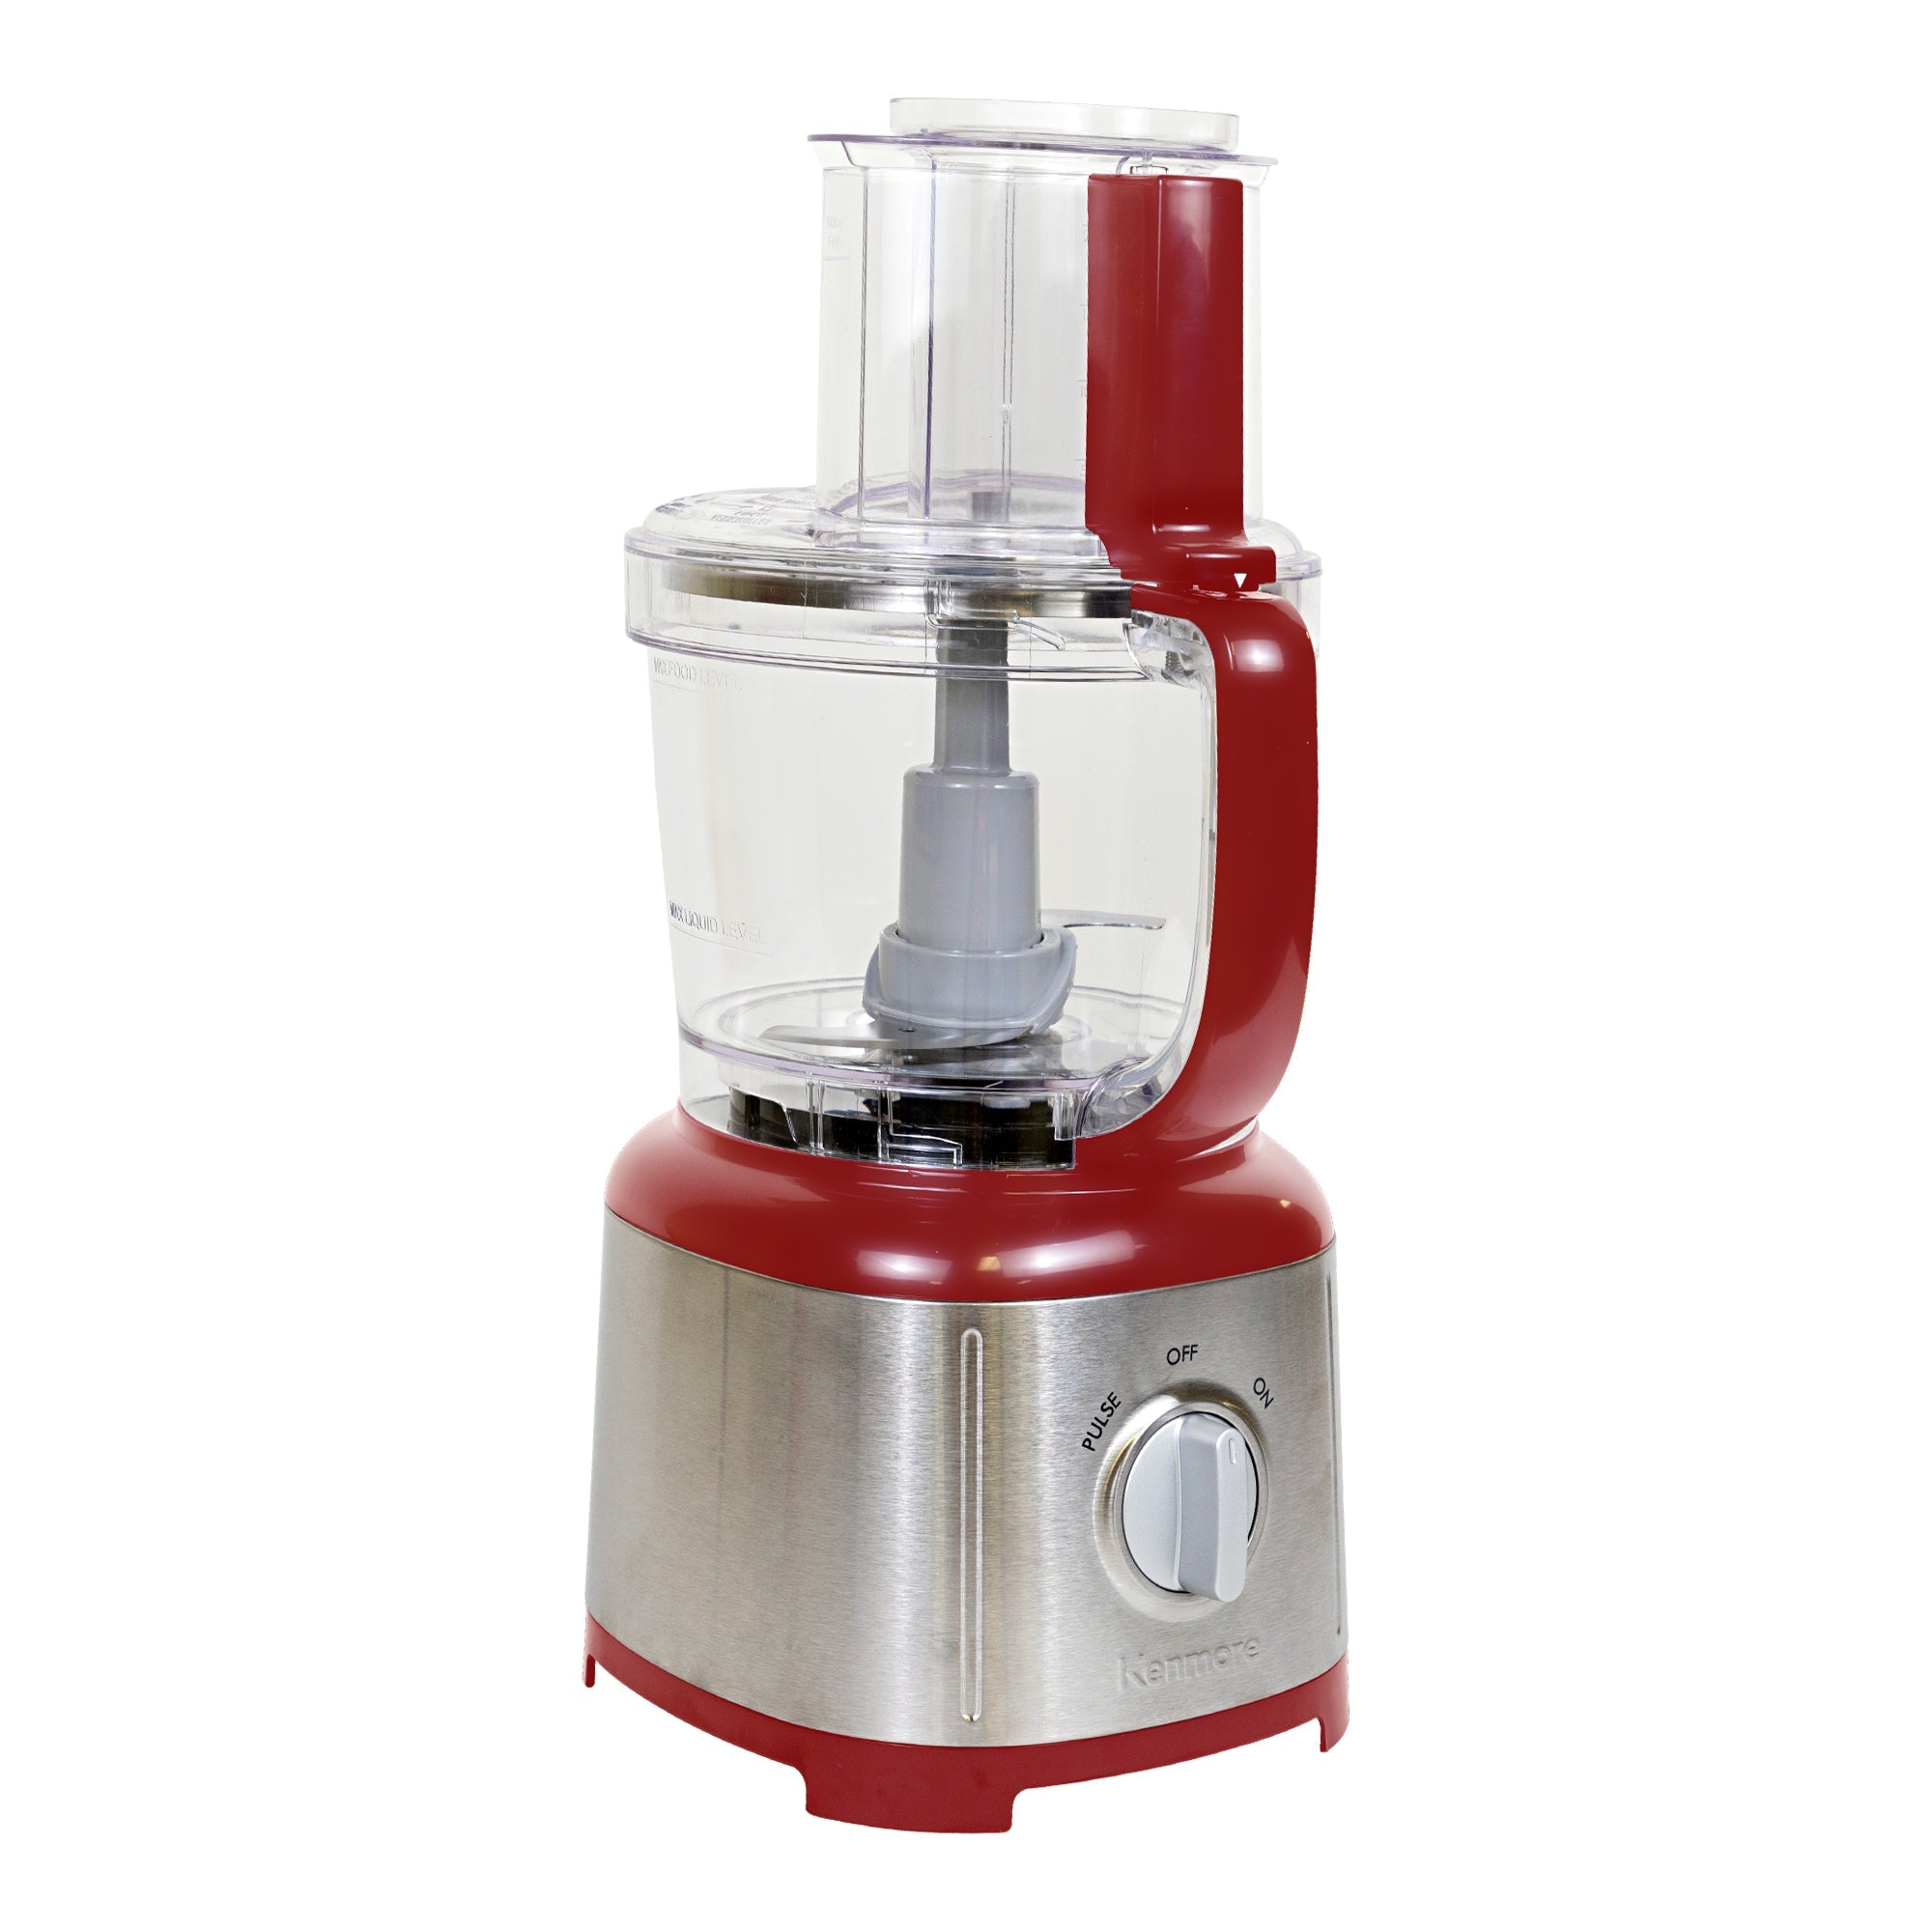 Product shot of Kenmore 11 cup food processor and vegetable chopper on a white background